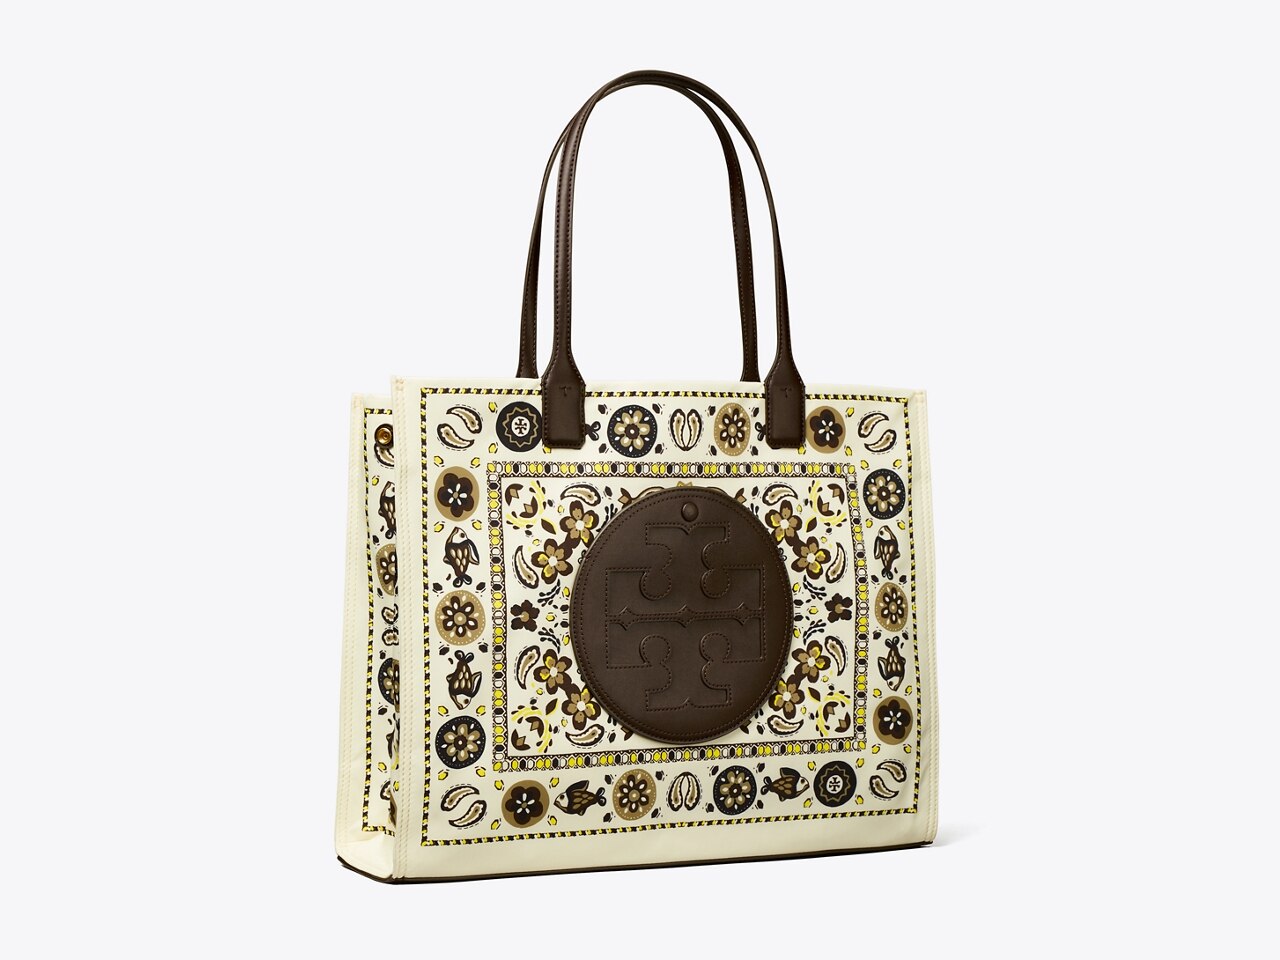 Celebrities Love Tory Burch: Shoes, Clothing and Handbags That Are Always  in Style